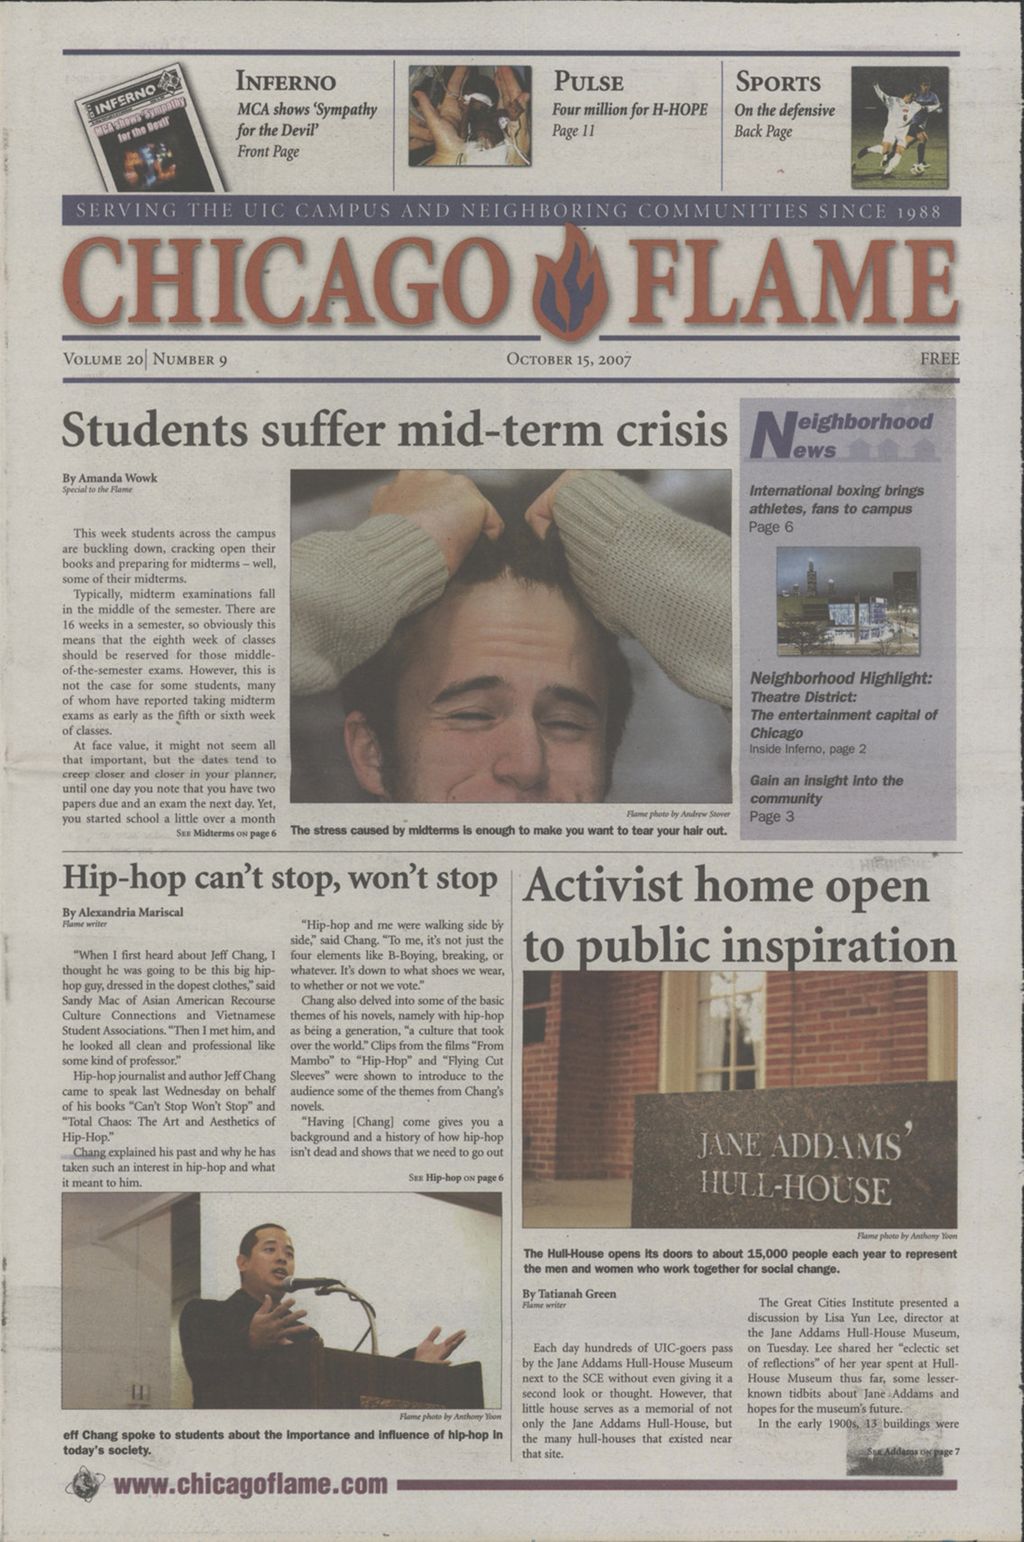 Miniature of Chicago Flame (October 15, 2007)